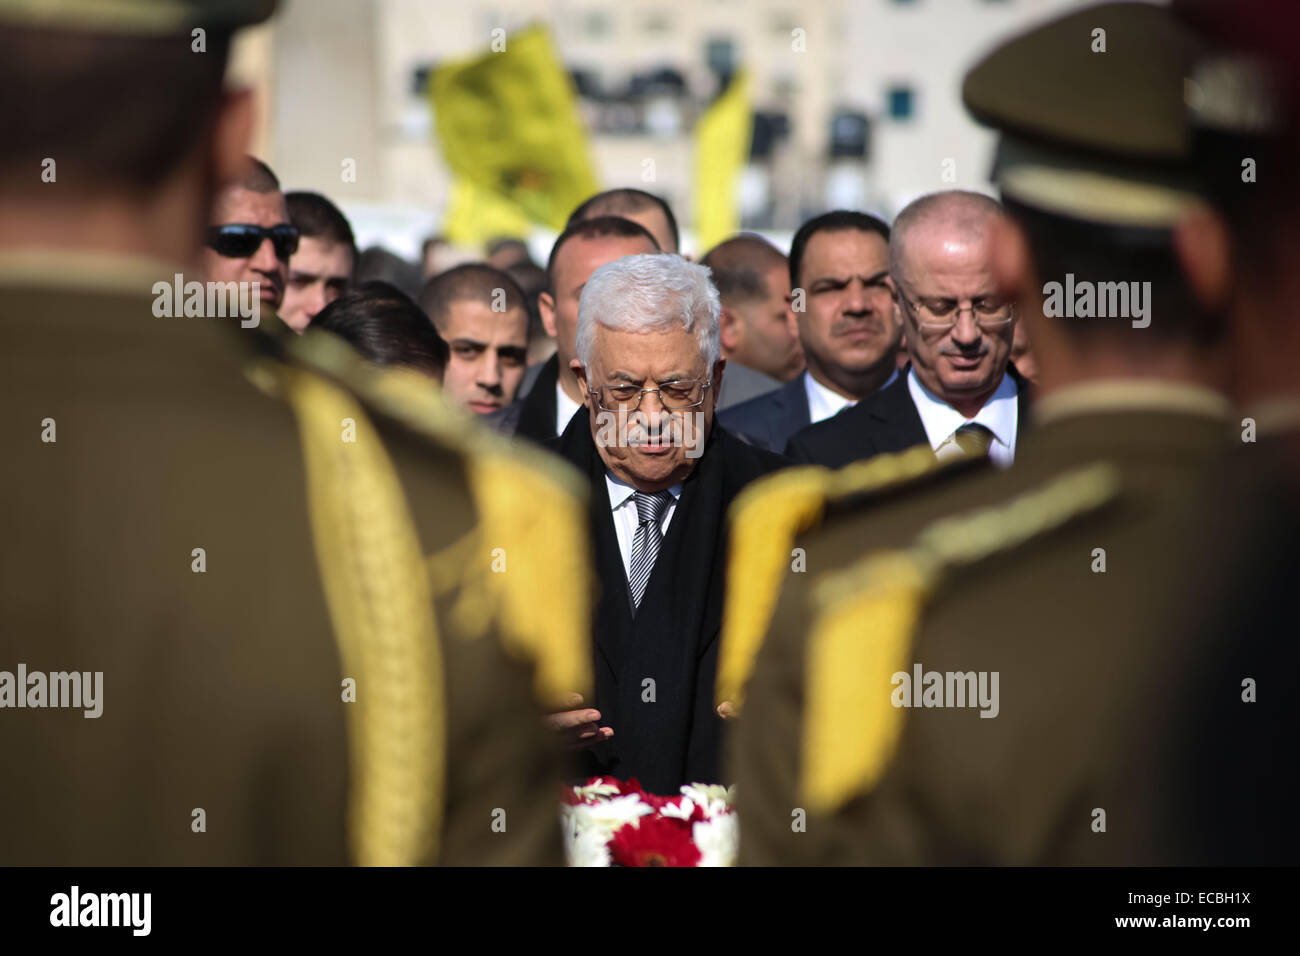 (141211) -- RAMALLAH, Dec. 11, 2014 (Xinhua) -- Palestinian President Mahmoud Abbas, center, attends the funeral procession of the late Palestinian cabinet member Ziad Abu Ain at the Palestinian Authority headquarters in the West Bank city of Ramallah on Dec. 11, 2014.(Xinhua/Fadi Arouri) Stock Photo